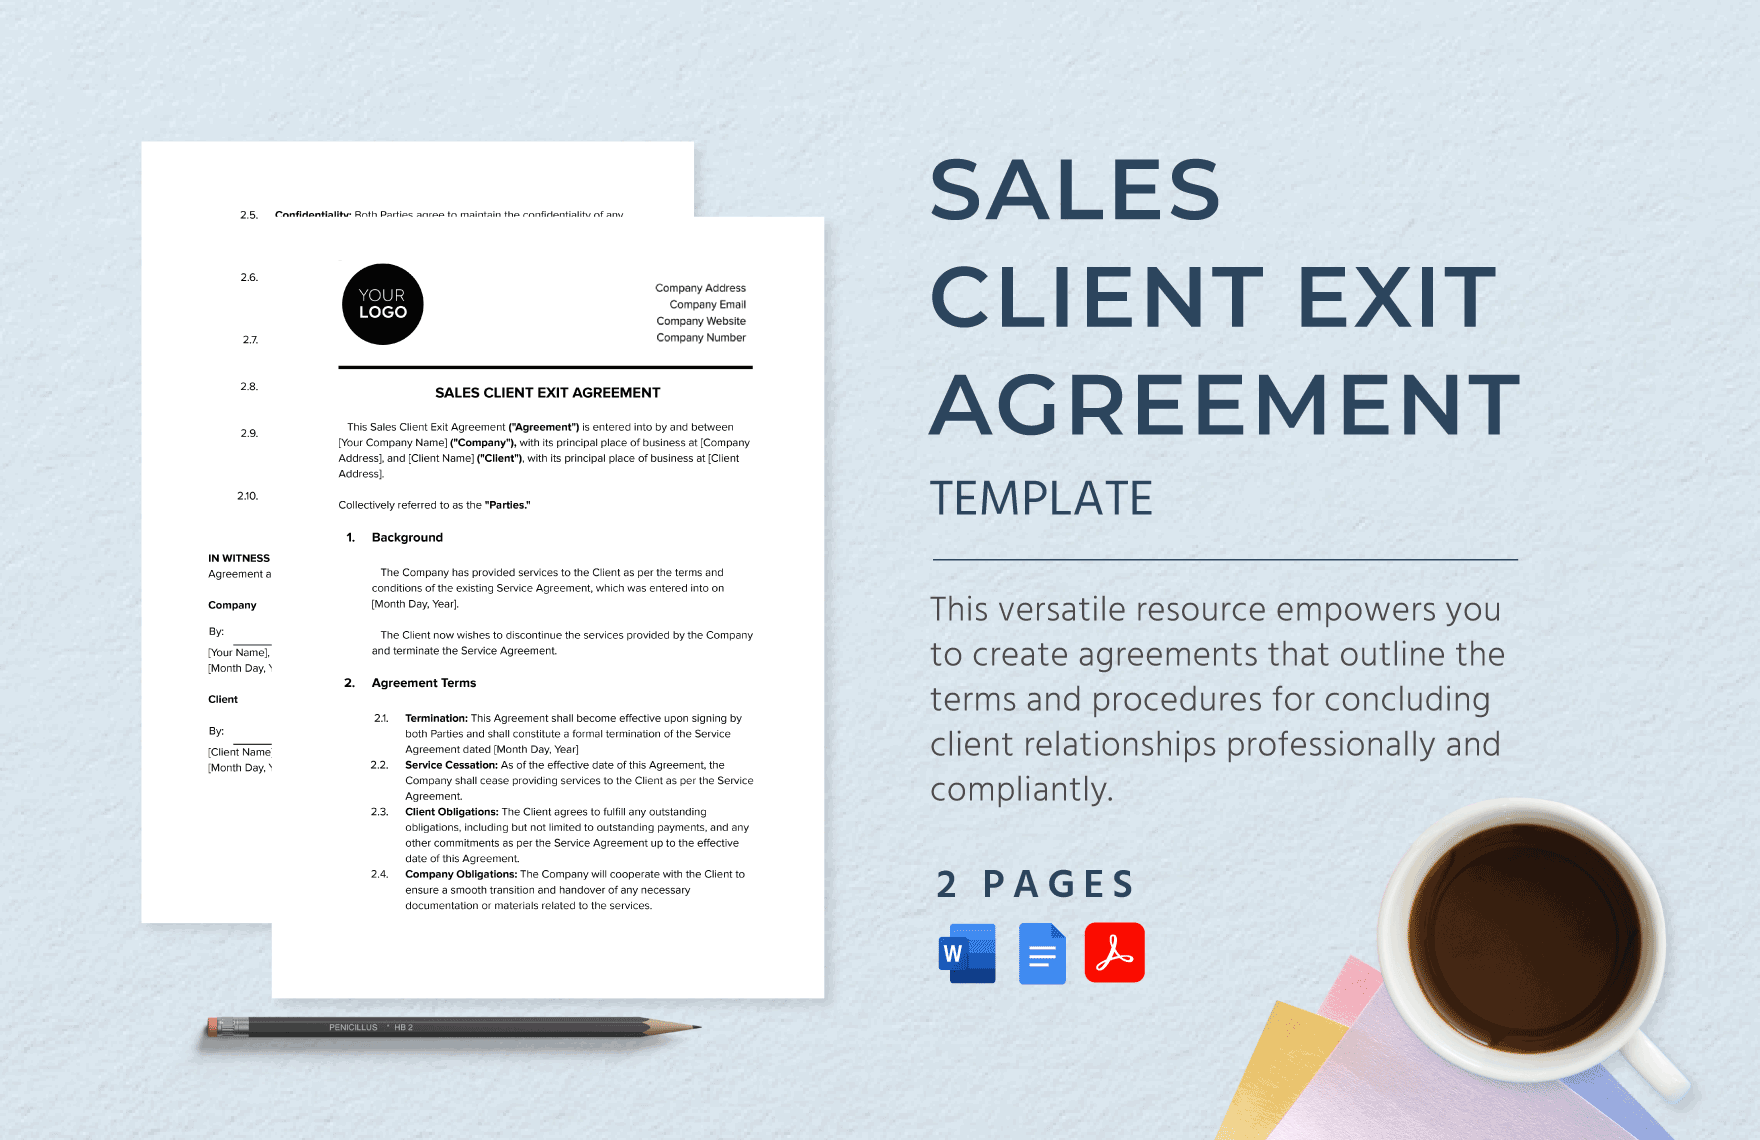 Sales Client Exit Agreement Template in Word, Google Docs, PDF